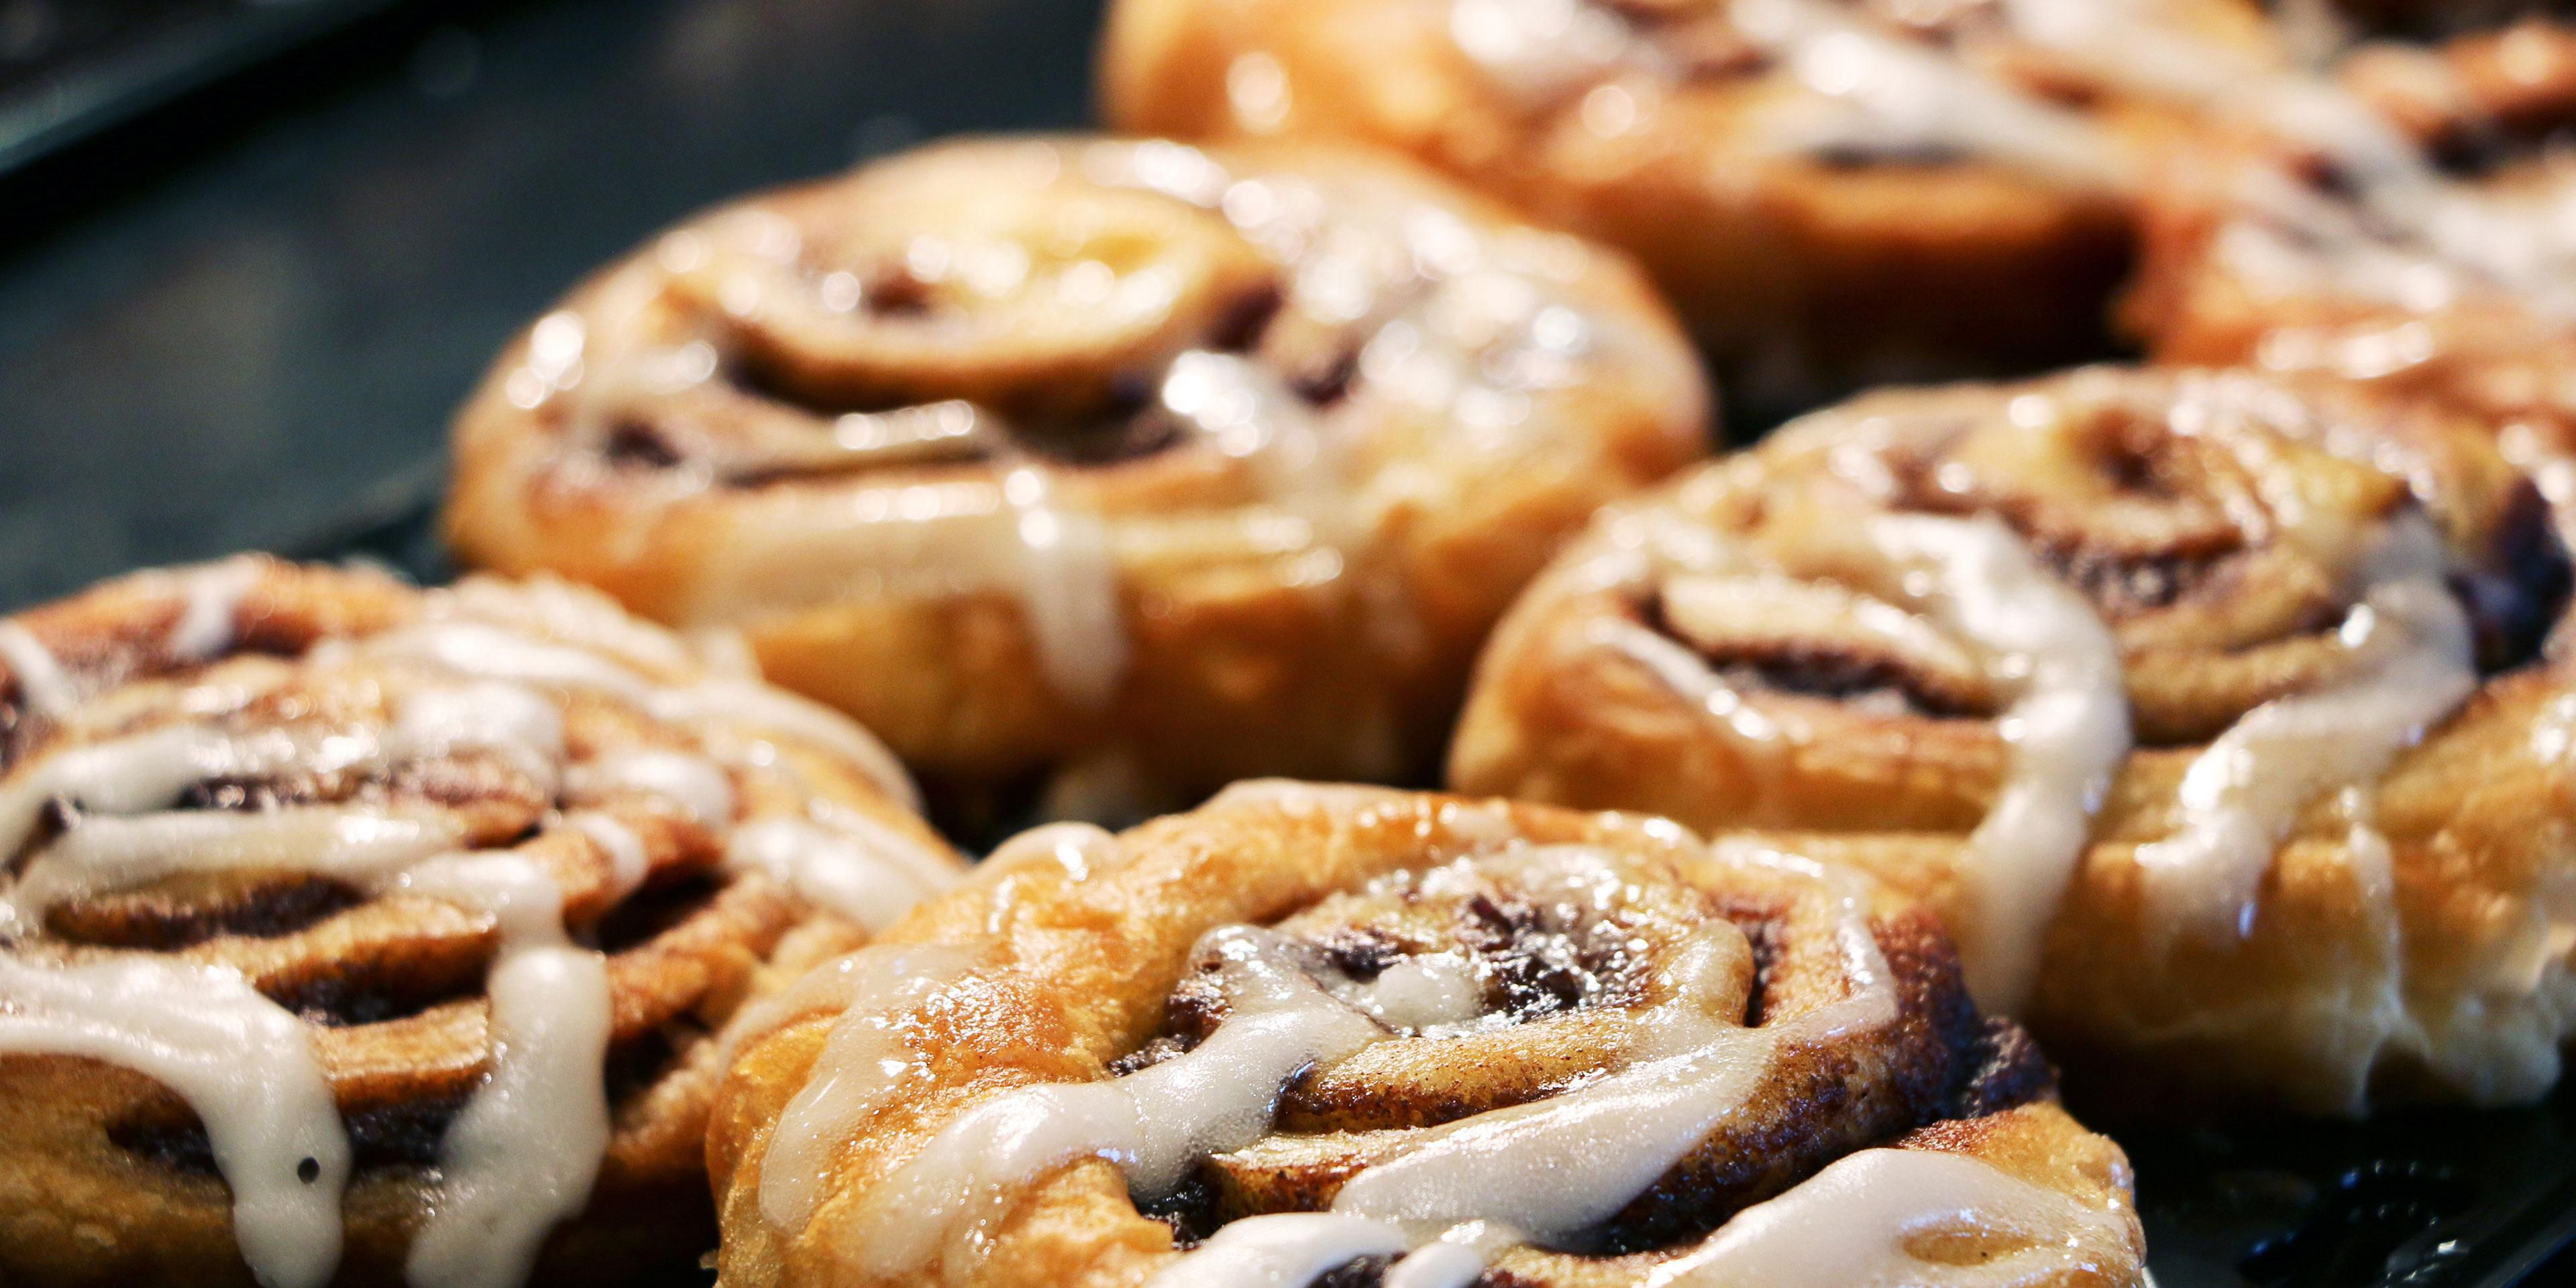 Cinnamon Rolls are only part of the story,  Enjoy hot items, and other great food choices to start your day!